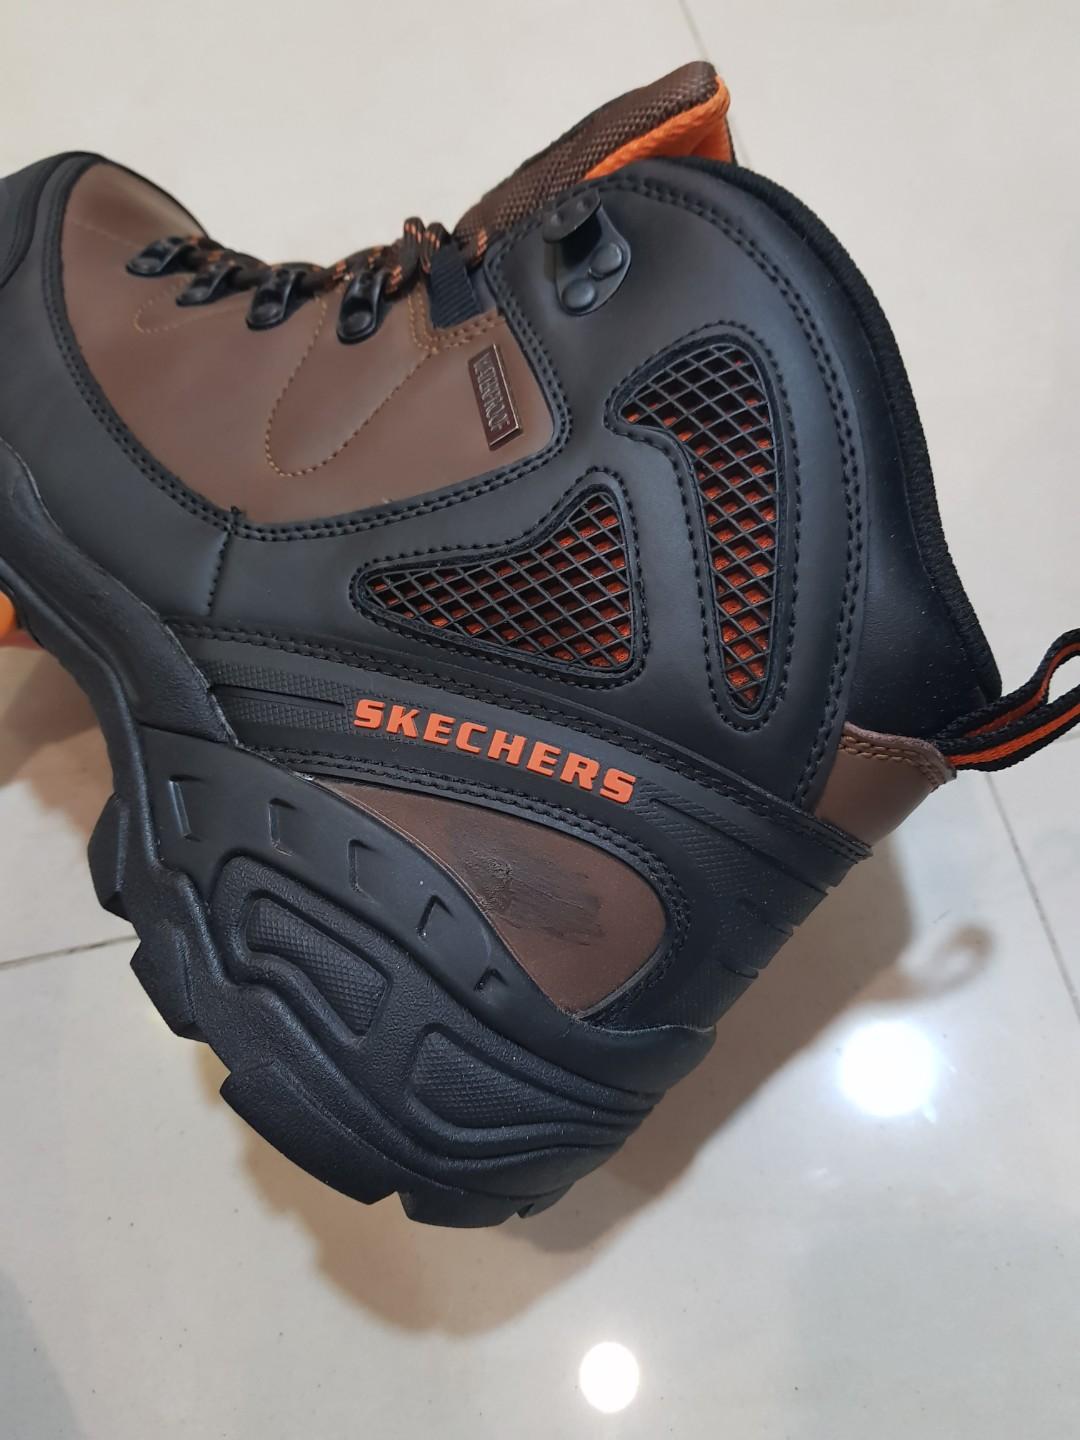 Skechers safety shoes/ steel toe (discounted to $80), Men's Fashion ...